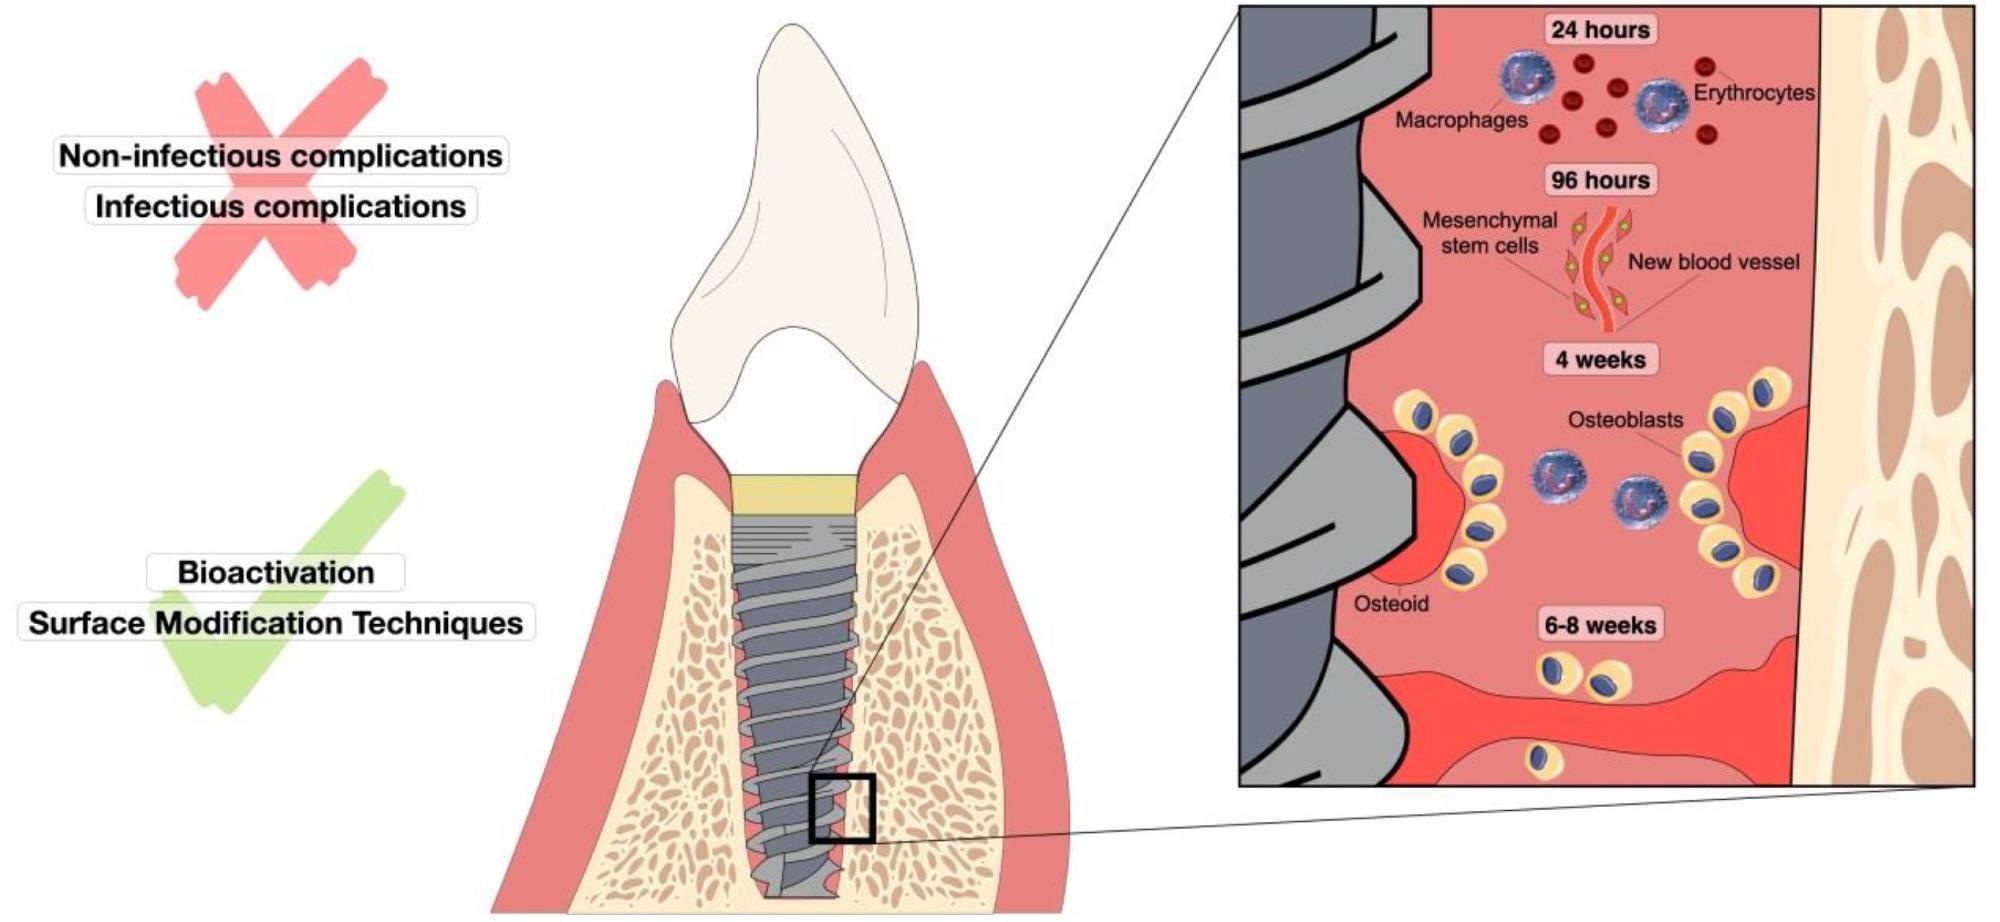 Representation of oral osseointegration events over time in a dental implant. The figure shows the sequence of cellular-level responses that occur after implant insertion for 24 h to approximately 8 weeks. Non-infectious and infectious complications are reported as factors that hinder osseointegration. Factors that improve this process are bioactivation and surface modification techniques.